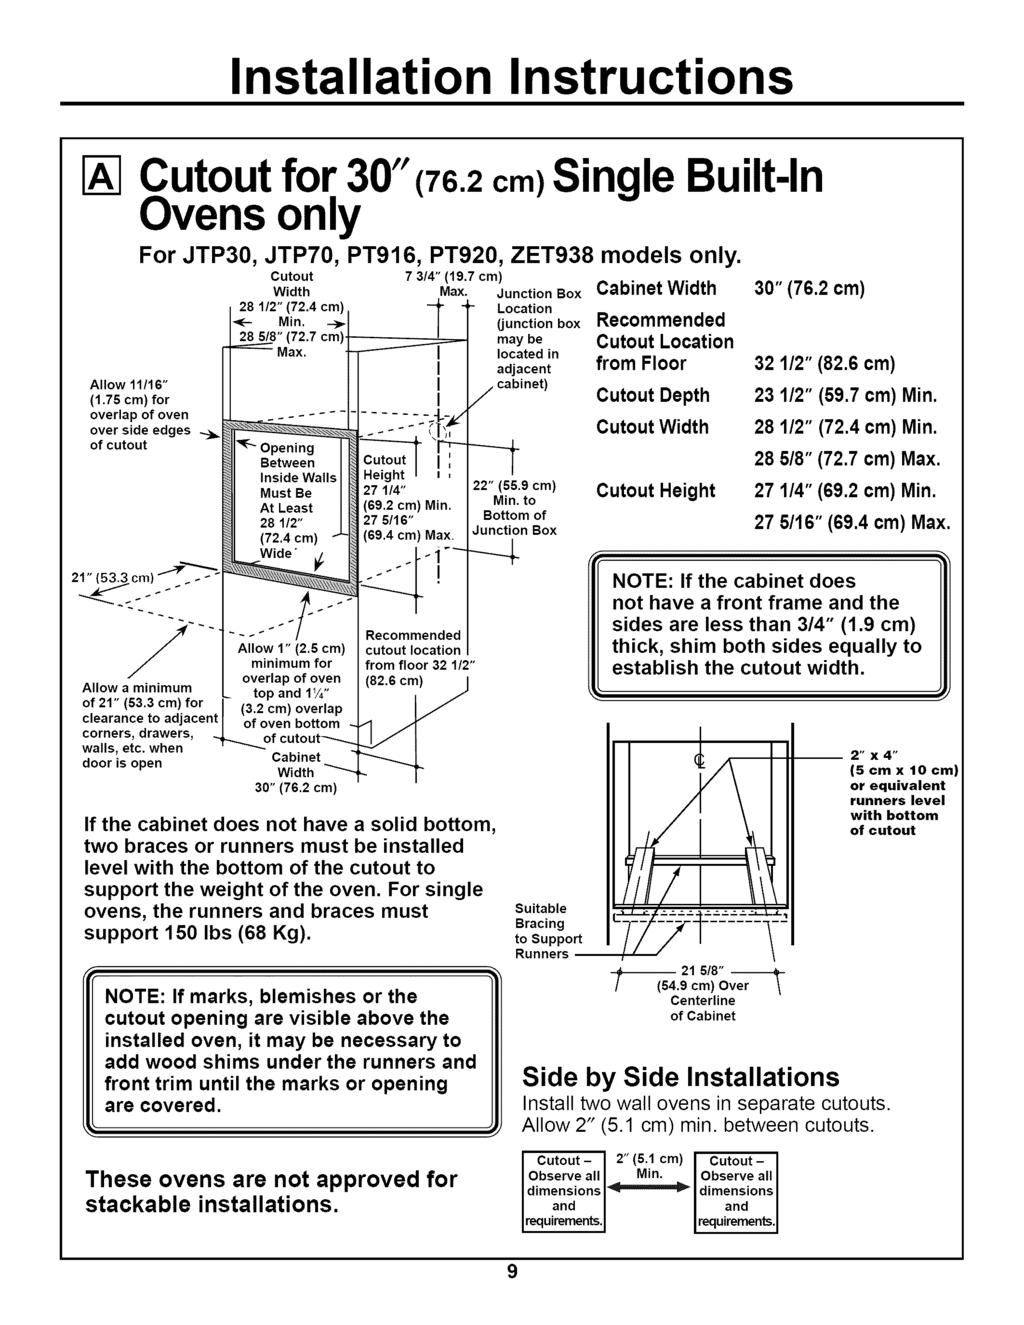 Cutout for 30"(76.2 cm)single Built-In Ovens only Allow 11/16" (1.75 cm) for overlap of oven over side edges of cutout For JTP30, JTP70, PT916, PT920, ZET938 models only. Cutout 7 3/4" (19.